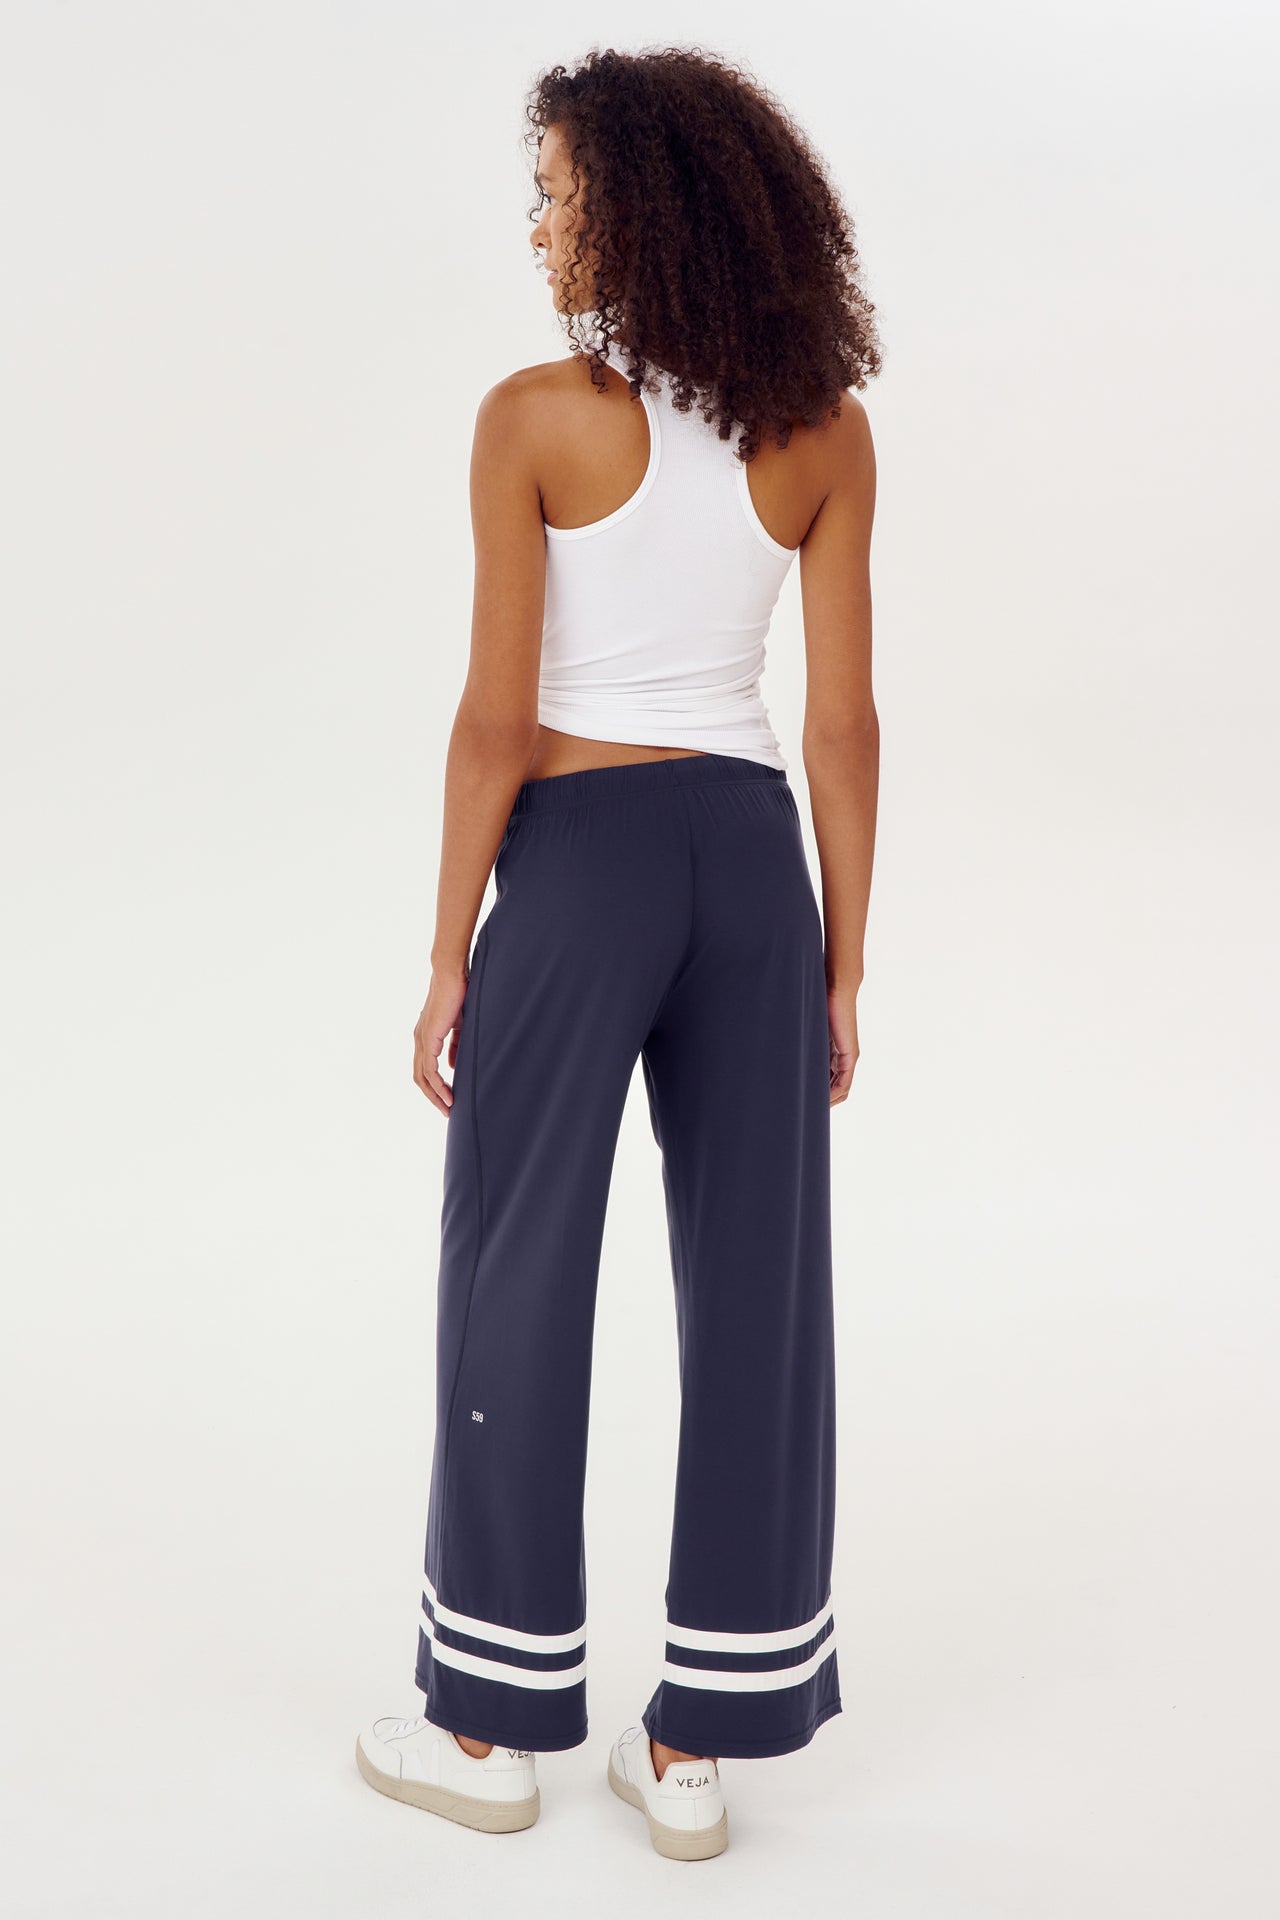 The back view of a woman wearing SPLITS59 Quinn Airweight Wide Leg Pant in Indigo.